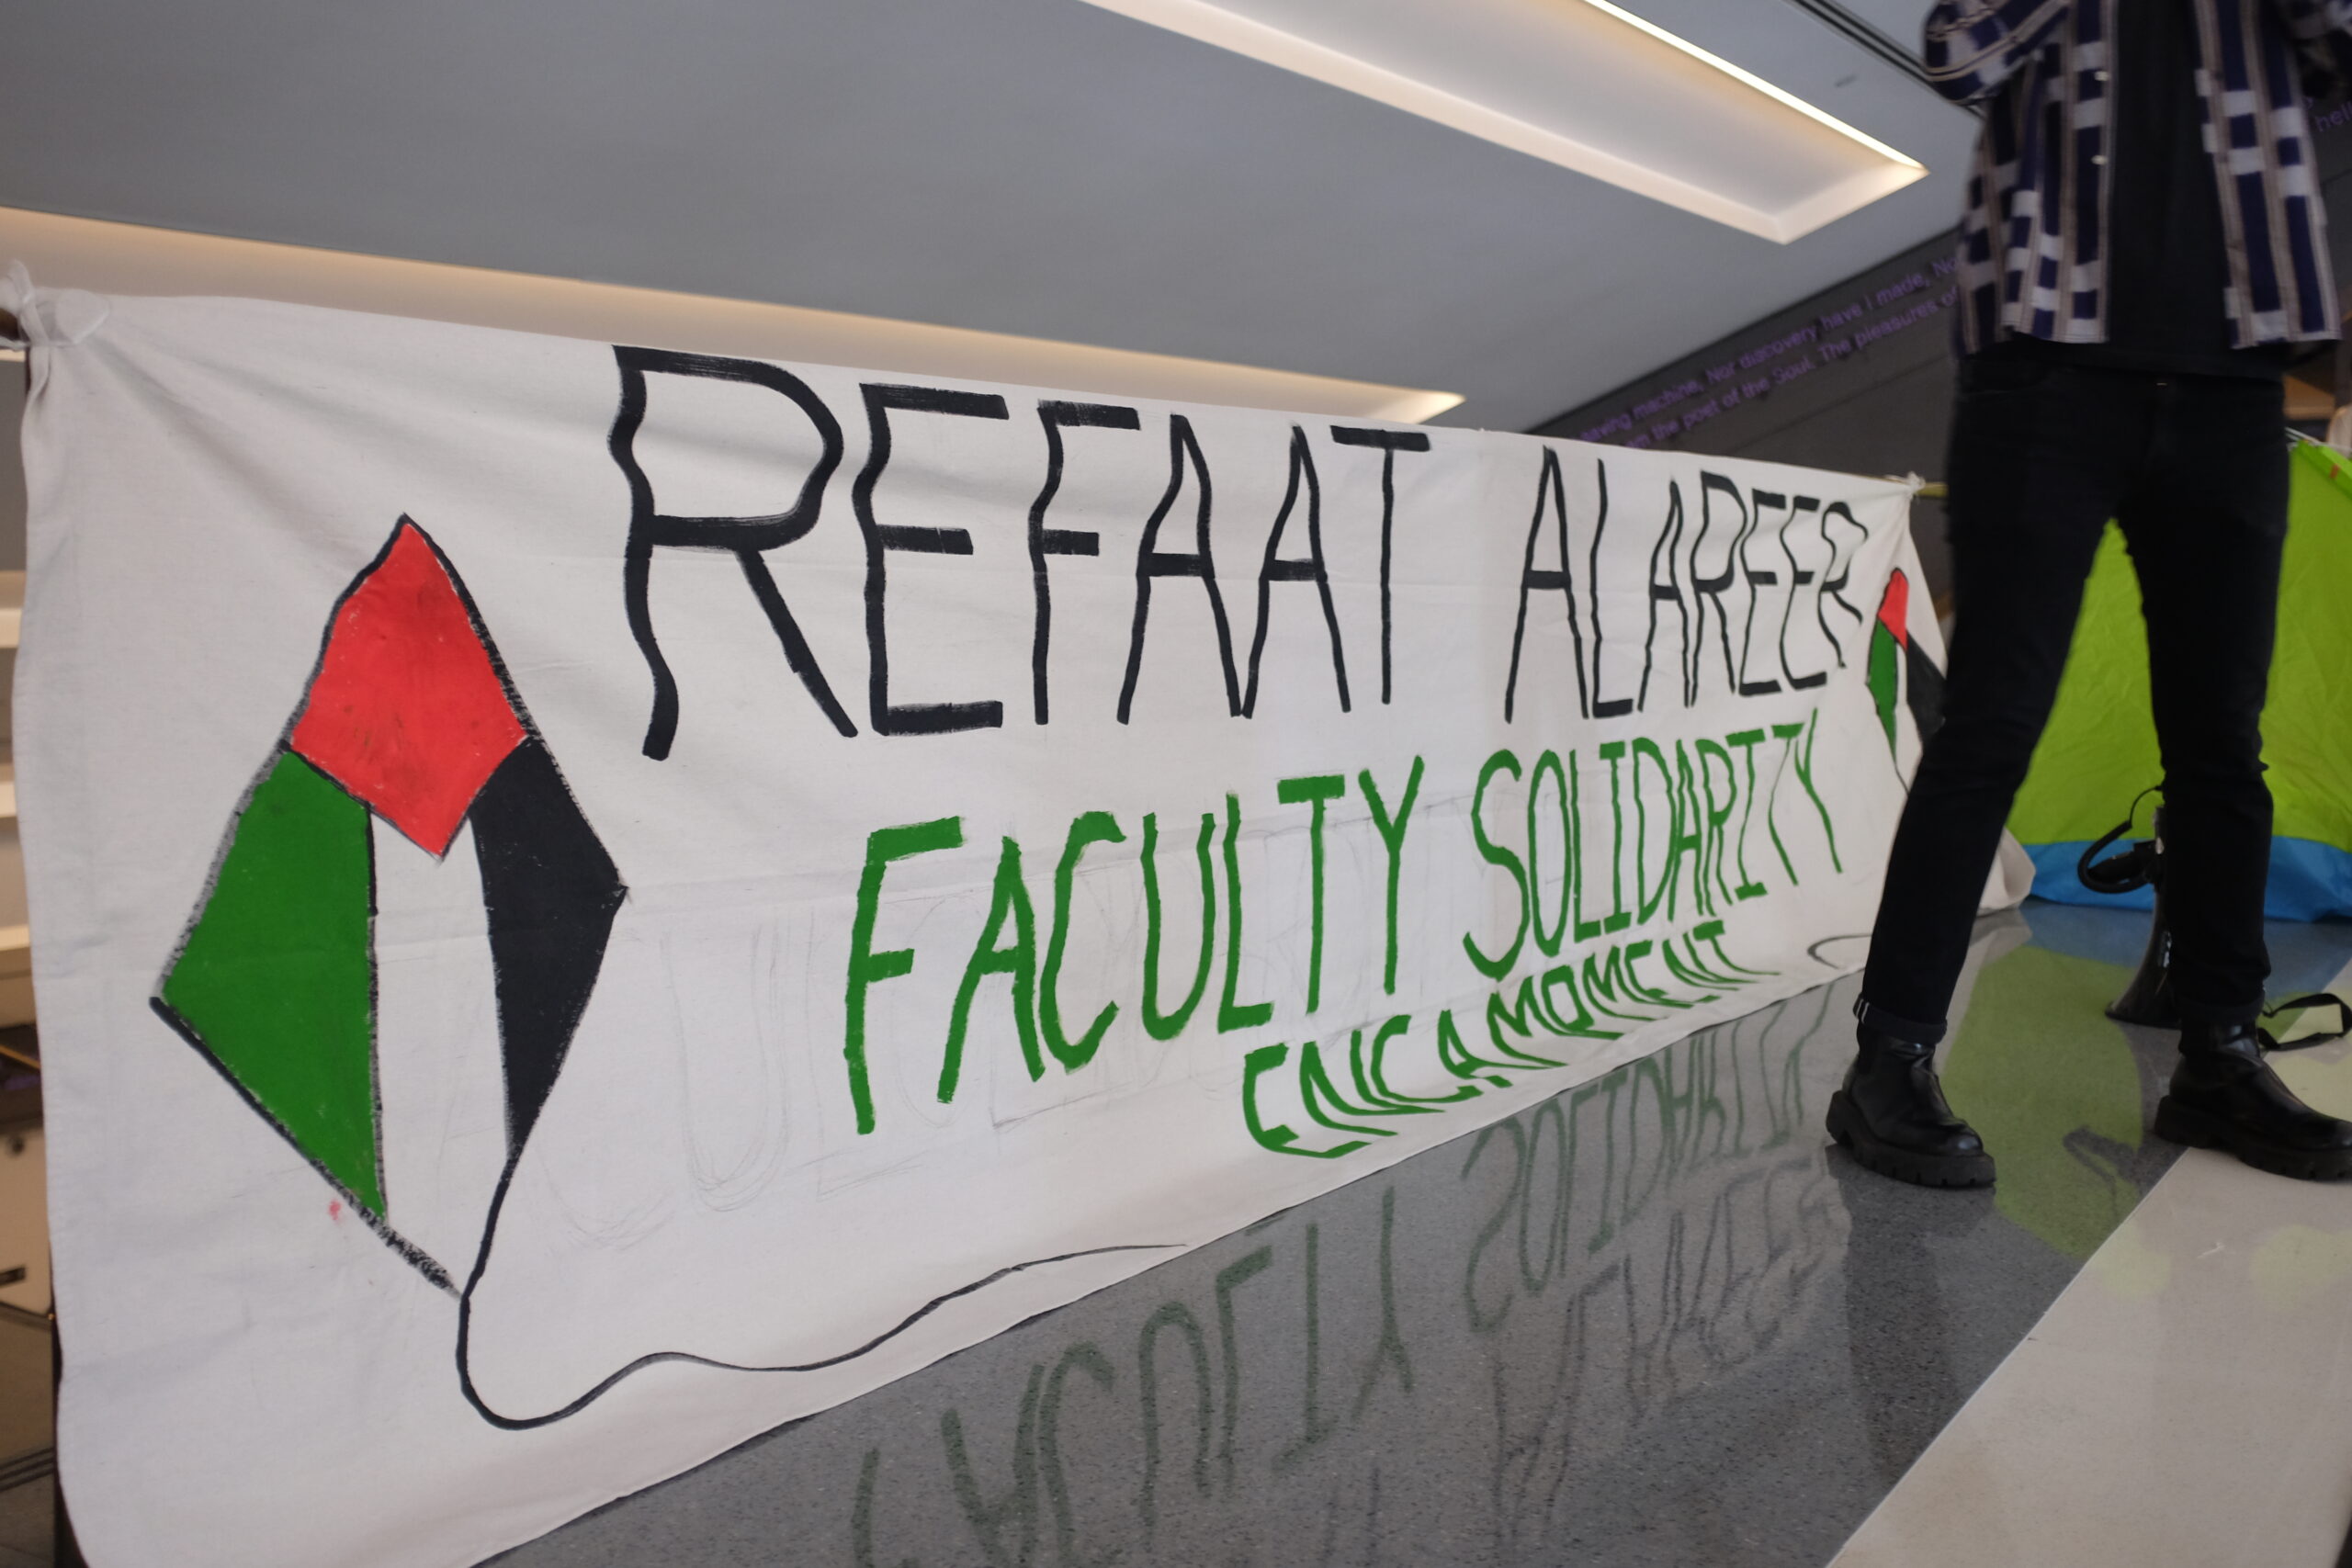 Photo of a banner that reads “Refaat Alareer Faculty Solidarity Encampment”. Next to the text are palestinian flags